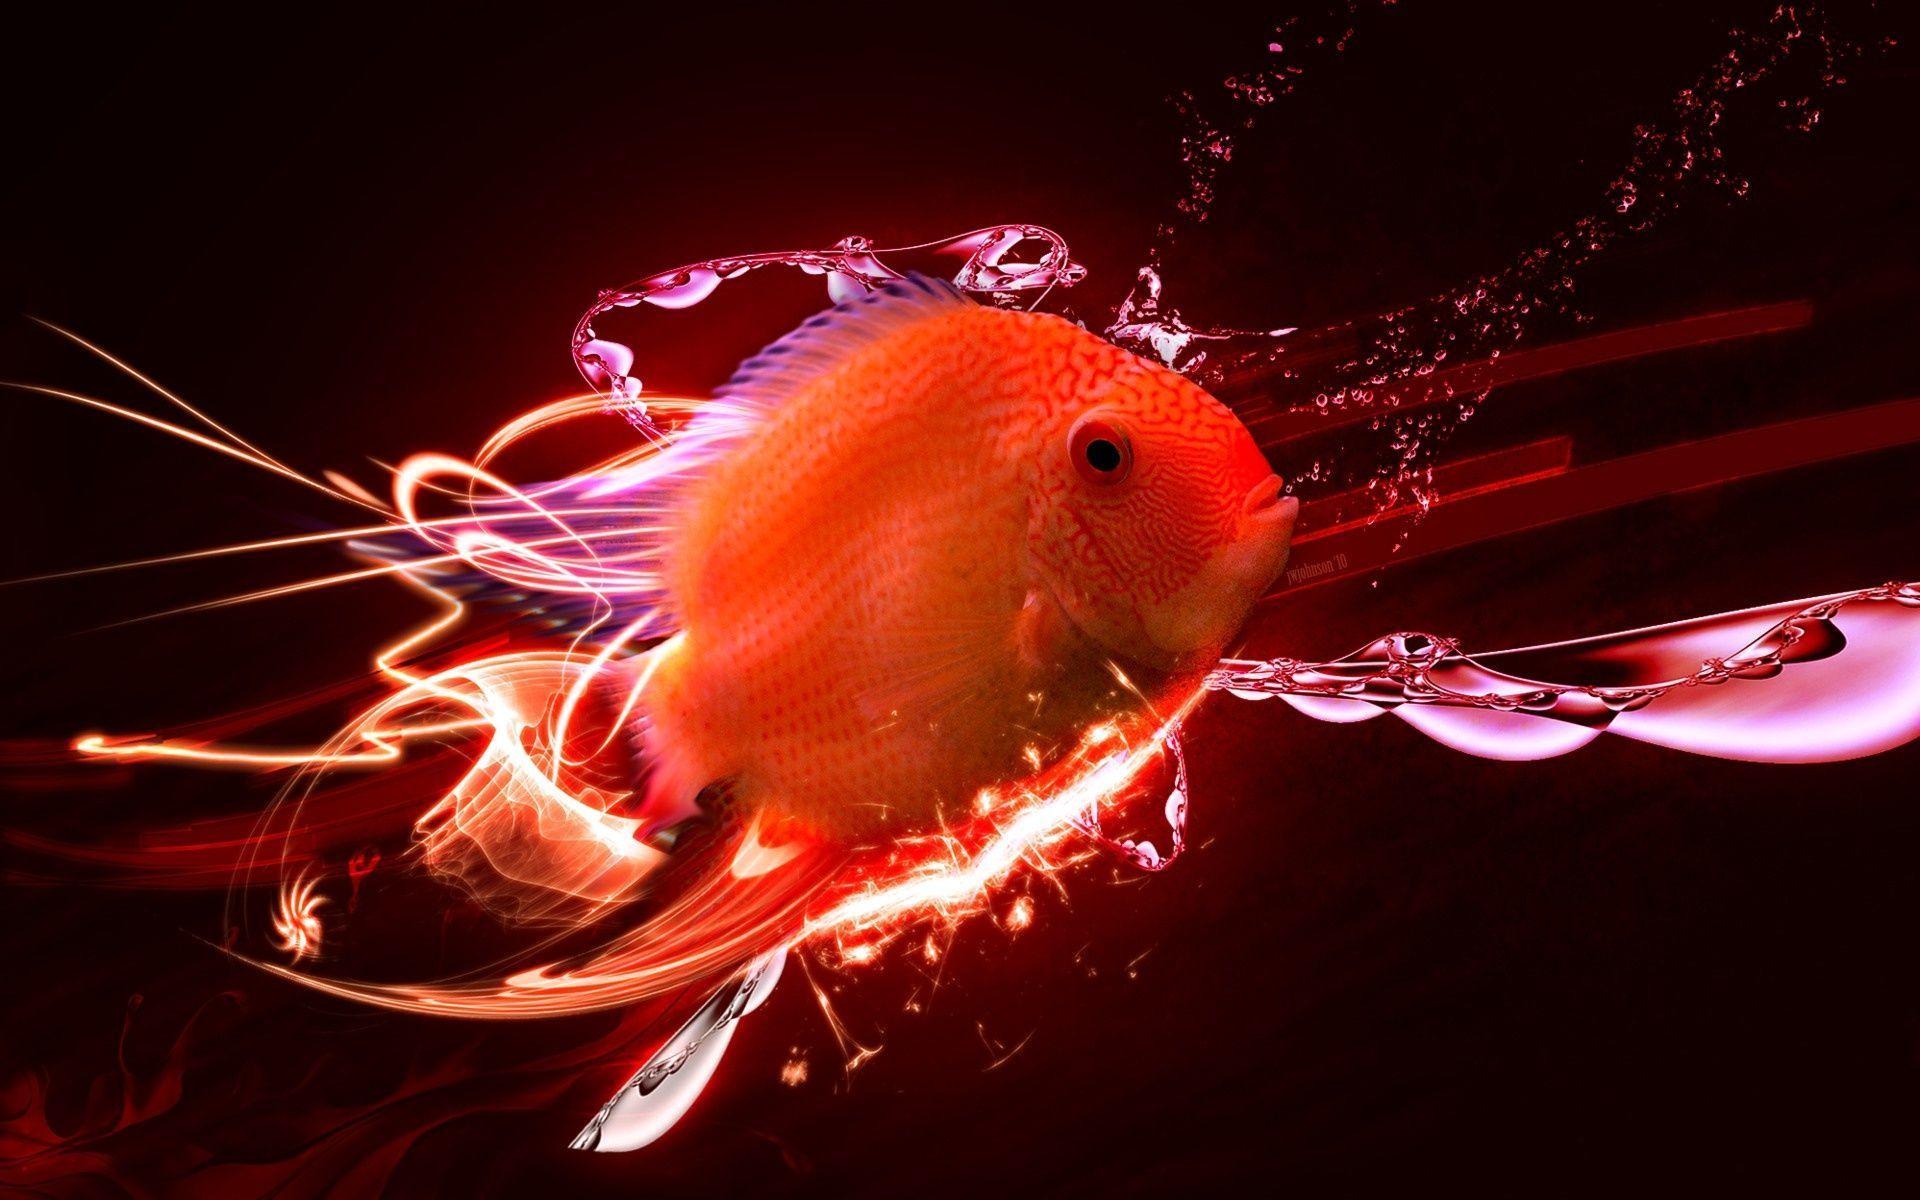 Digital Red Fish Wallpaper And Photo - Hd Wallpaper Of Golden Fish , HD Wallpaper & Backgrounds